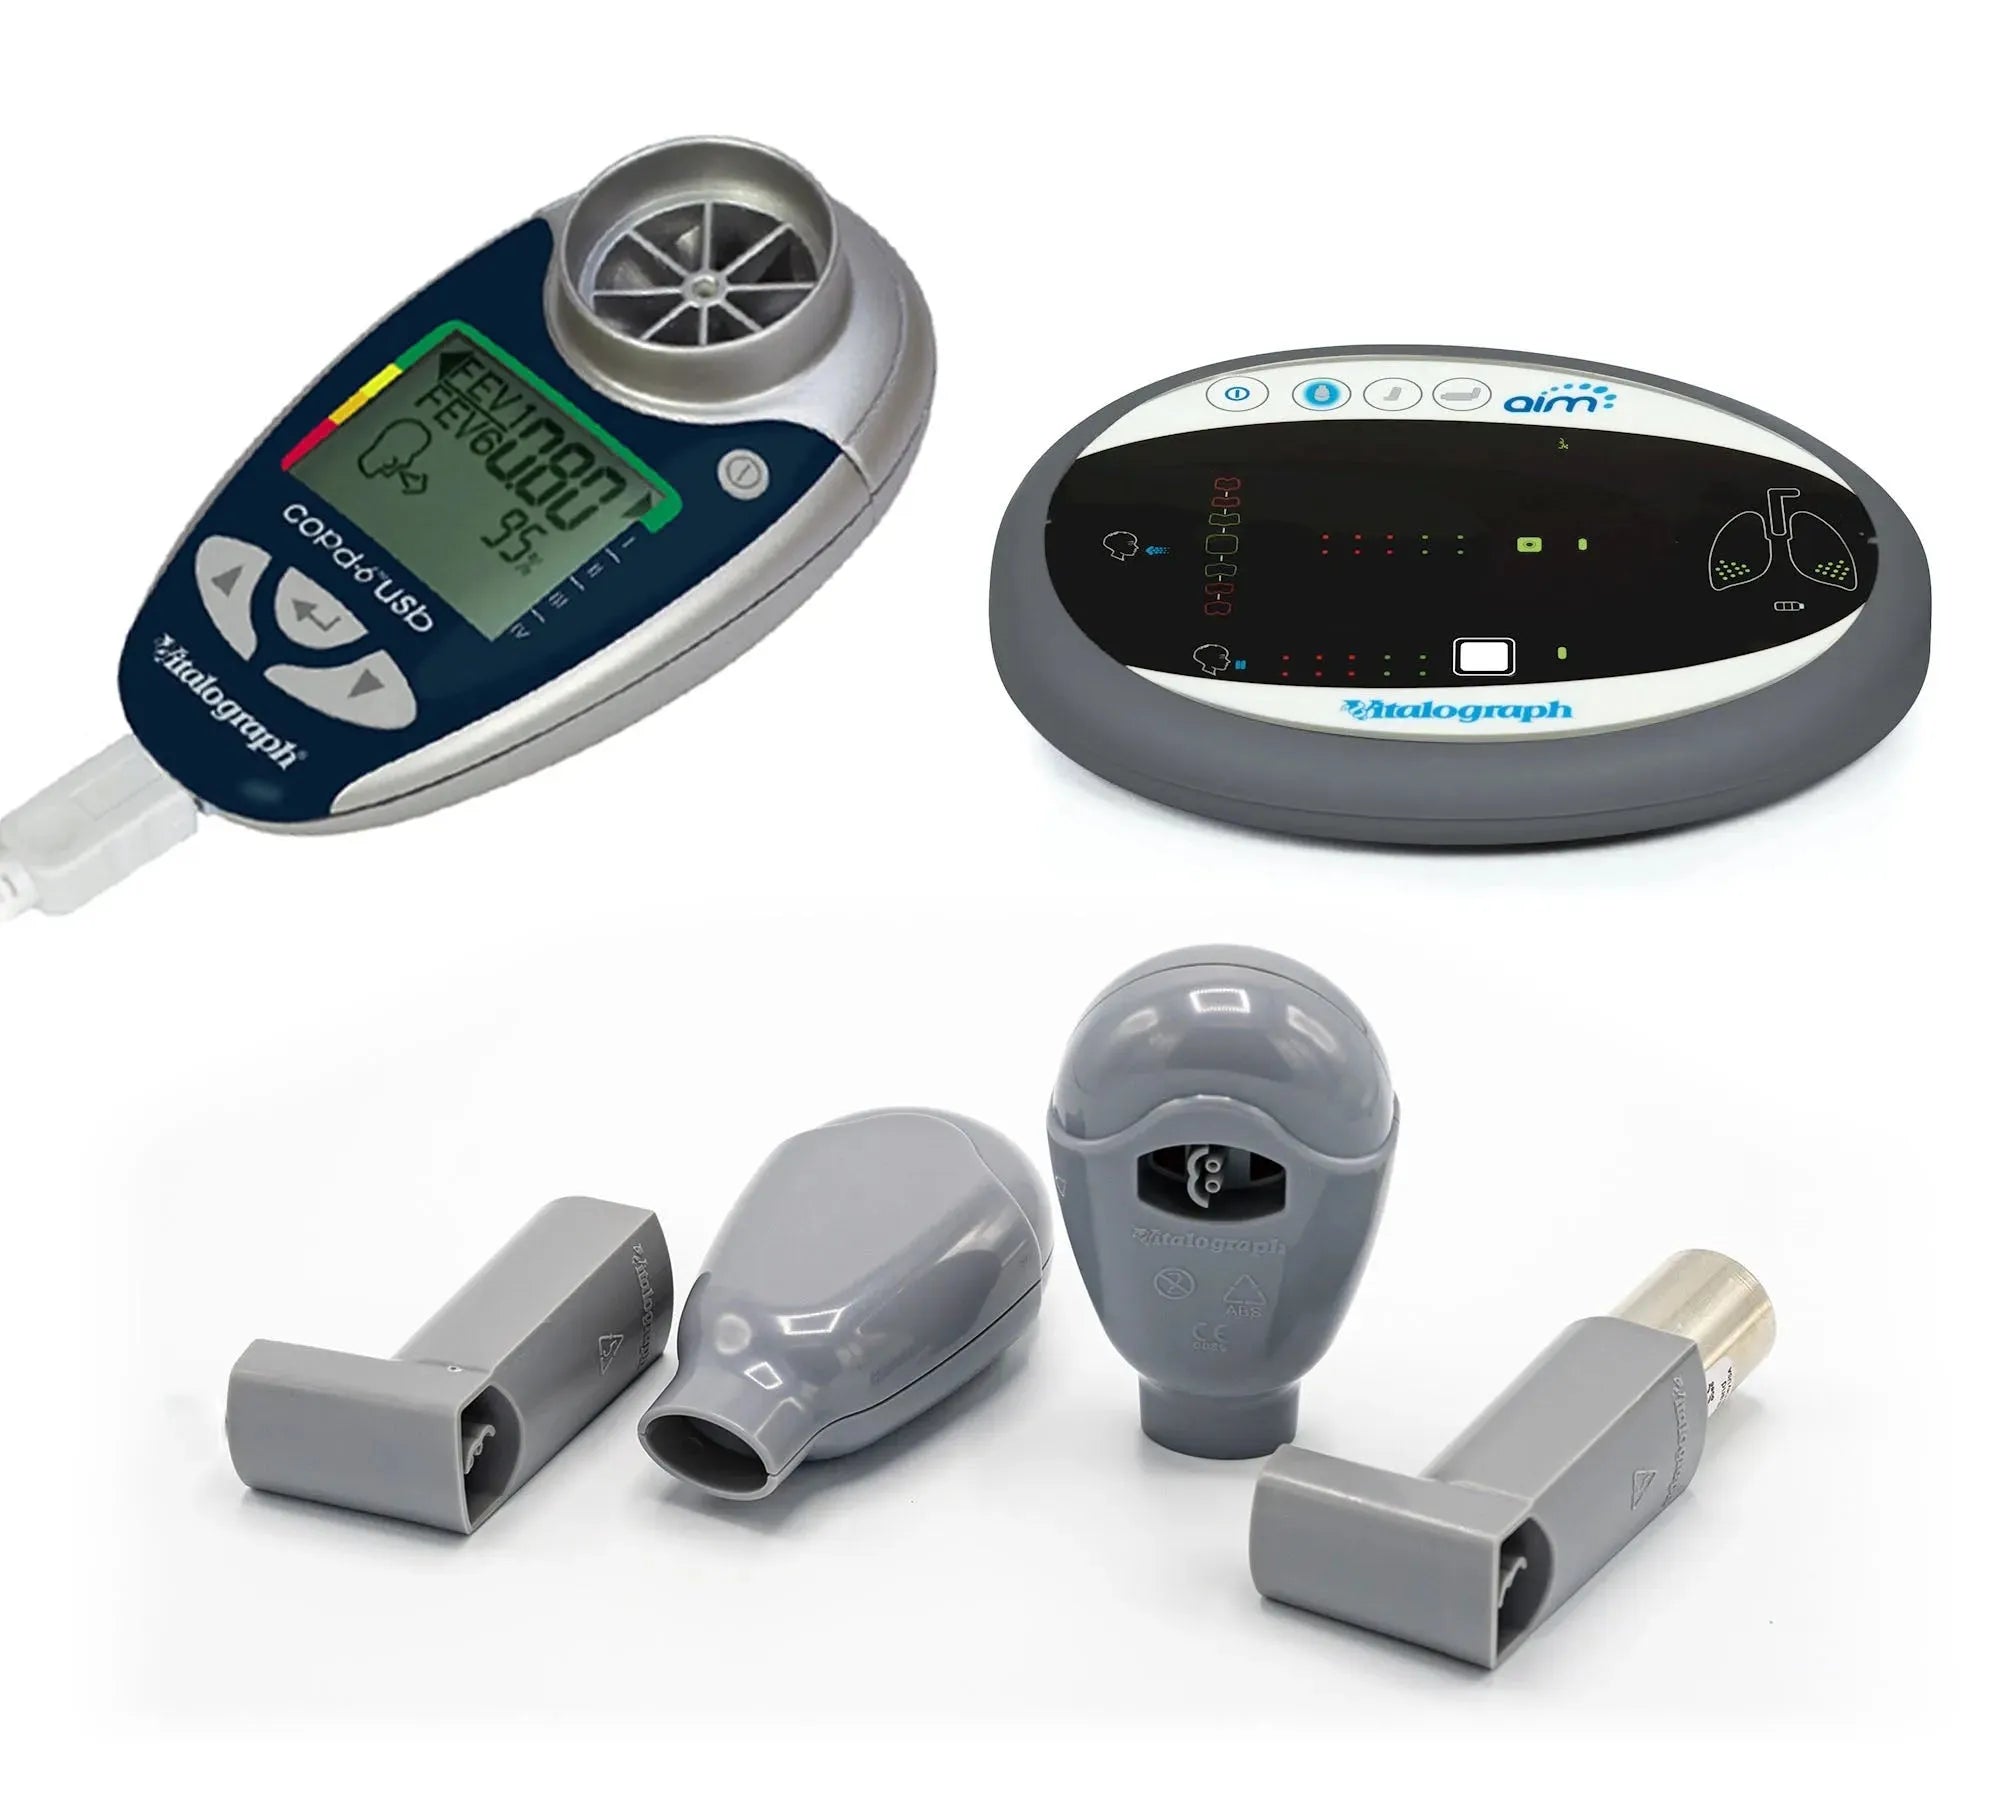 Top left is a USB COPD Screener.  Top Right is Vitalograph AIM™ (Aerosol Inhalation Monitor).  The lower portion of the image is two MDI and two DPI simulators.